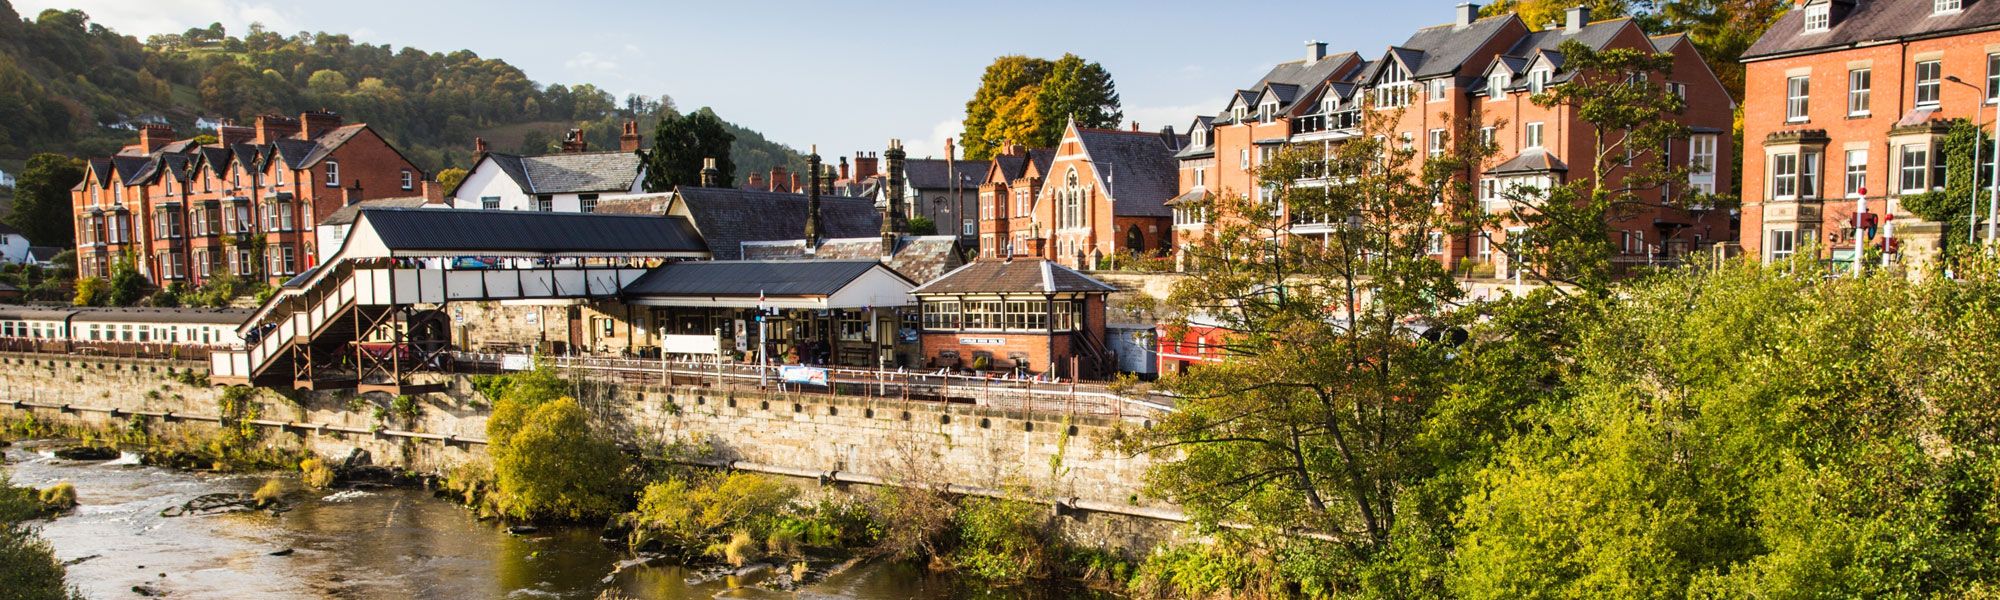 River and train station in Llangollen, North Wales